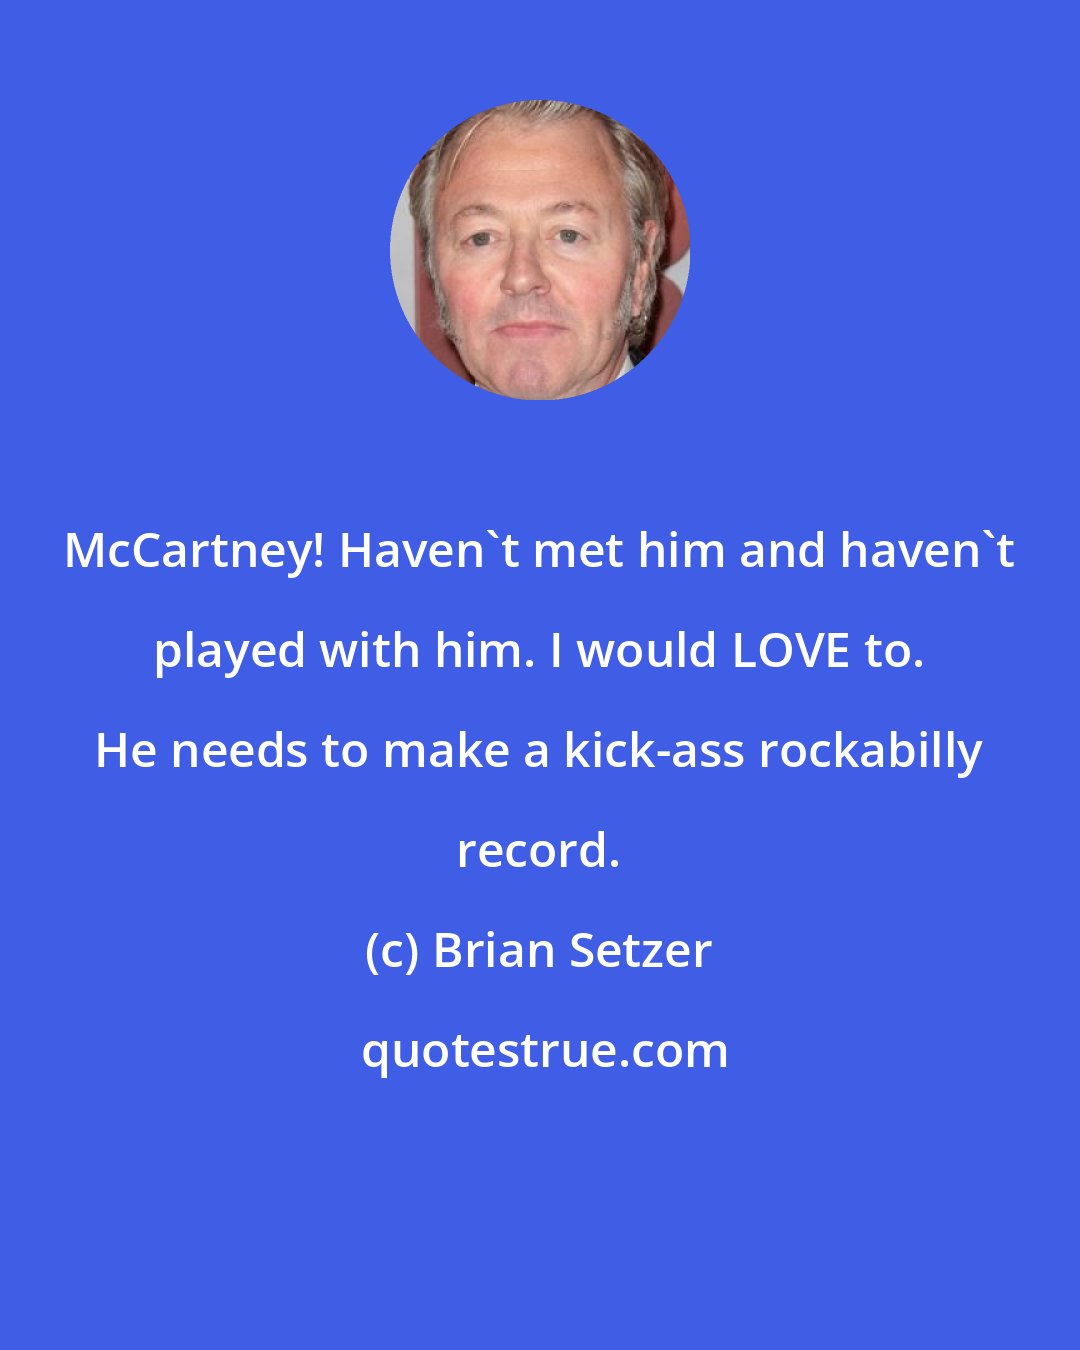 Brian Setzer: McCartney! Haven't met him and haven't played with him. I would LOVE to. He needs to make a kick-ass rockabilly record.